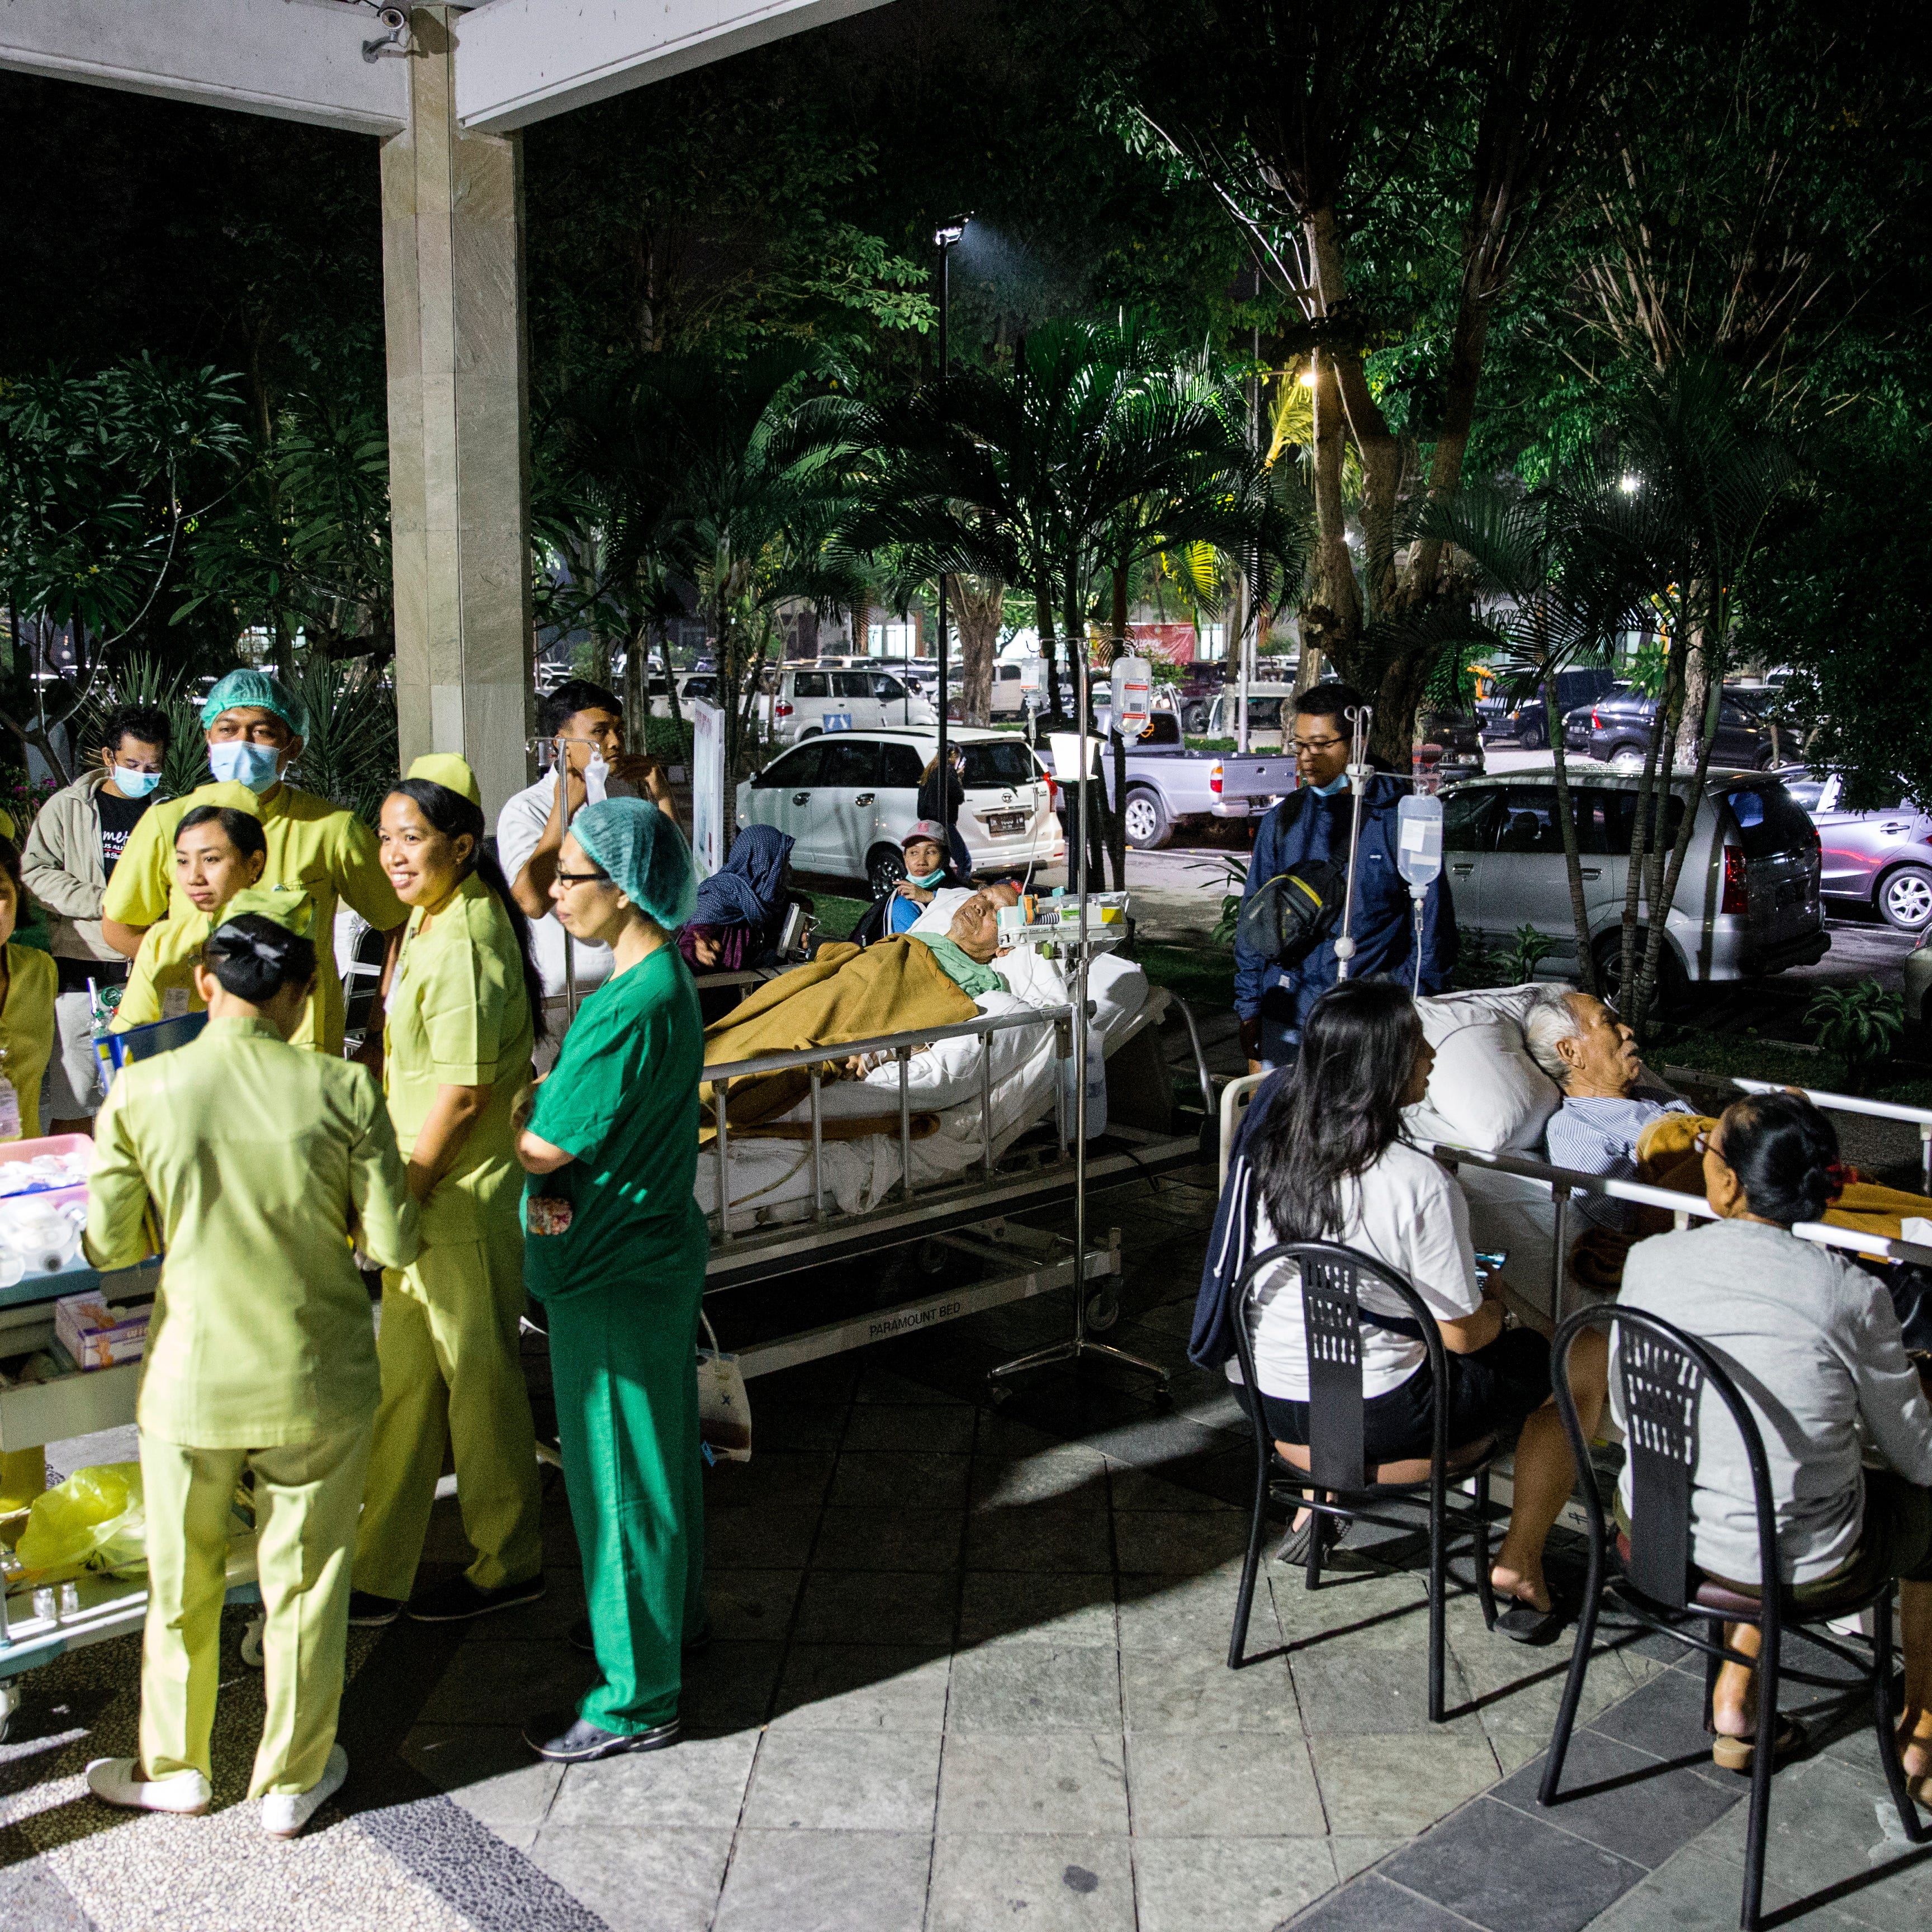 Hospital patients are moved outside of the hospital building after an earthquake was felt in Denpasar, Bali, Indonesia on Aug. 5, 2018. Reports state that the magnitude 7.0 earthquake was centered on the Indonesian island of Lombok nearby of Bali.